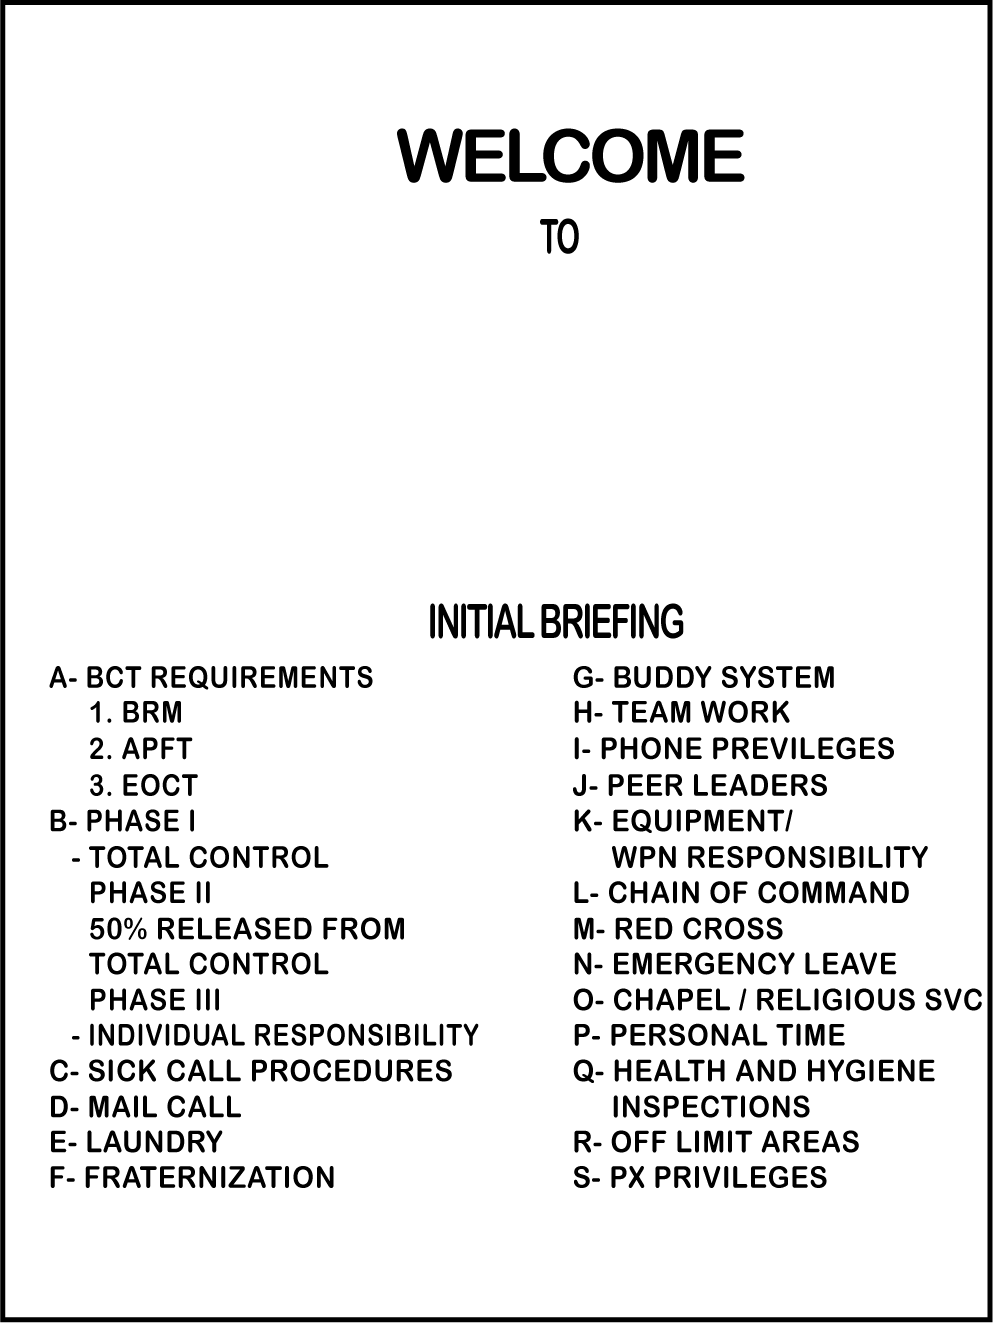 MC - 0000-0000-00049, WELCOME TO (INITIAL BRIEFING) MB-12